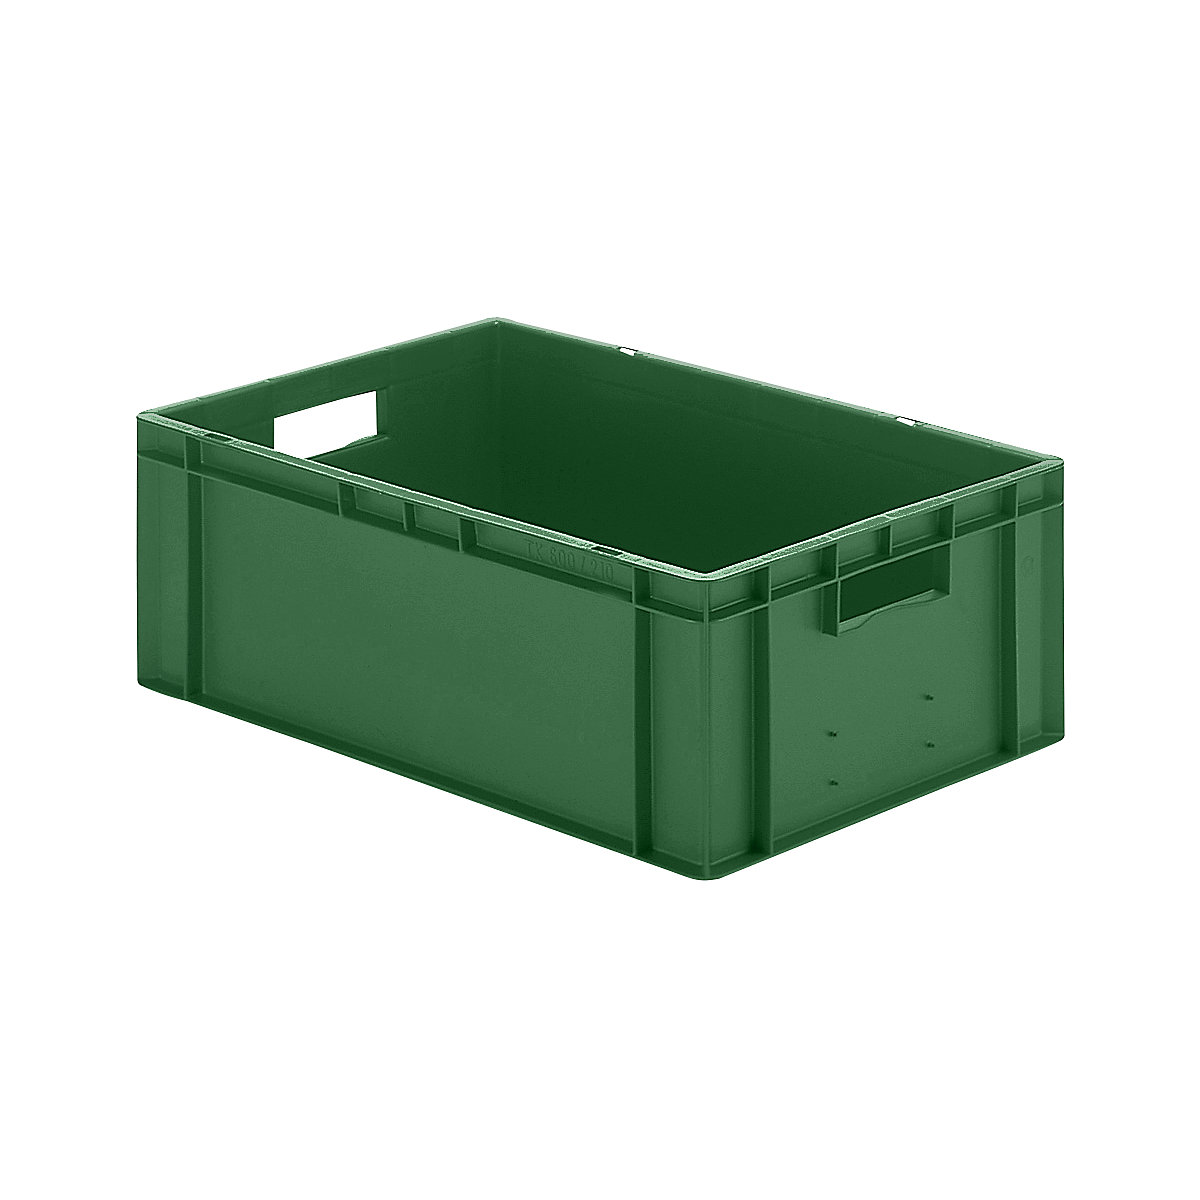 Euro stacking container, closed walls and base, LxWxH 600 x 400 x 210 mm, green, pack of 5